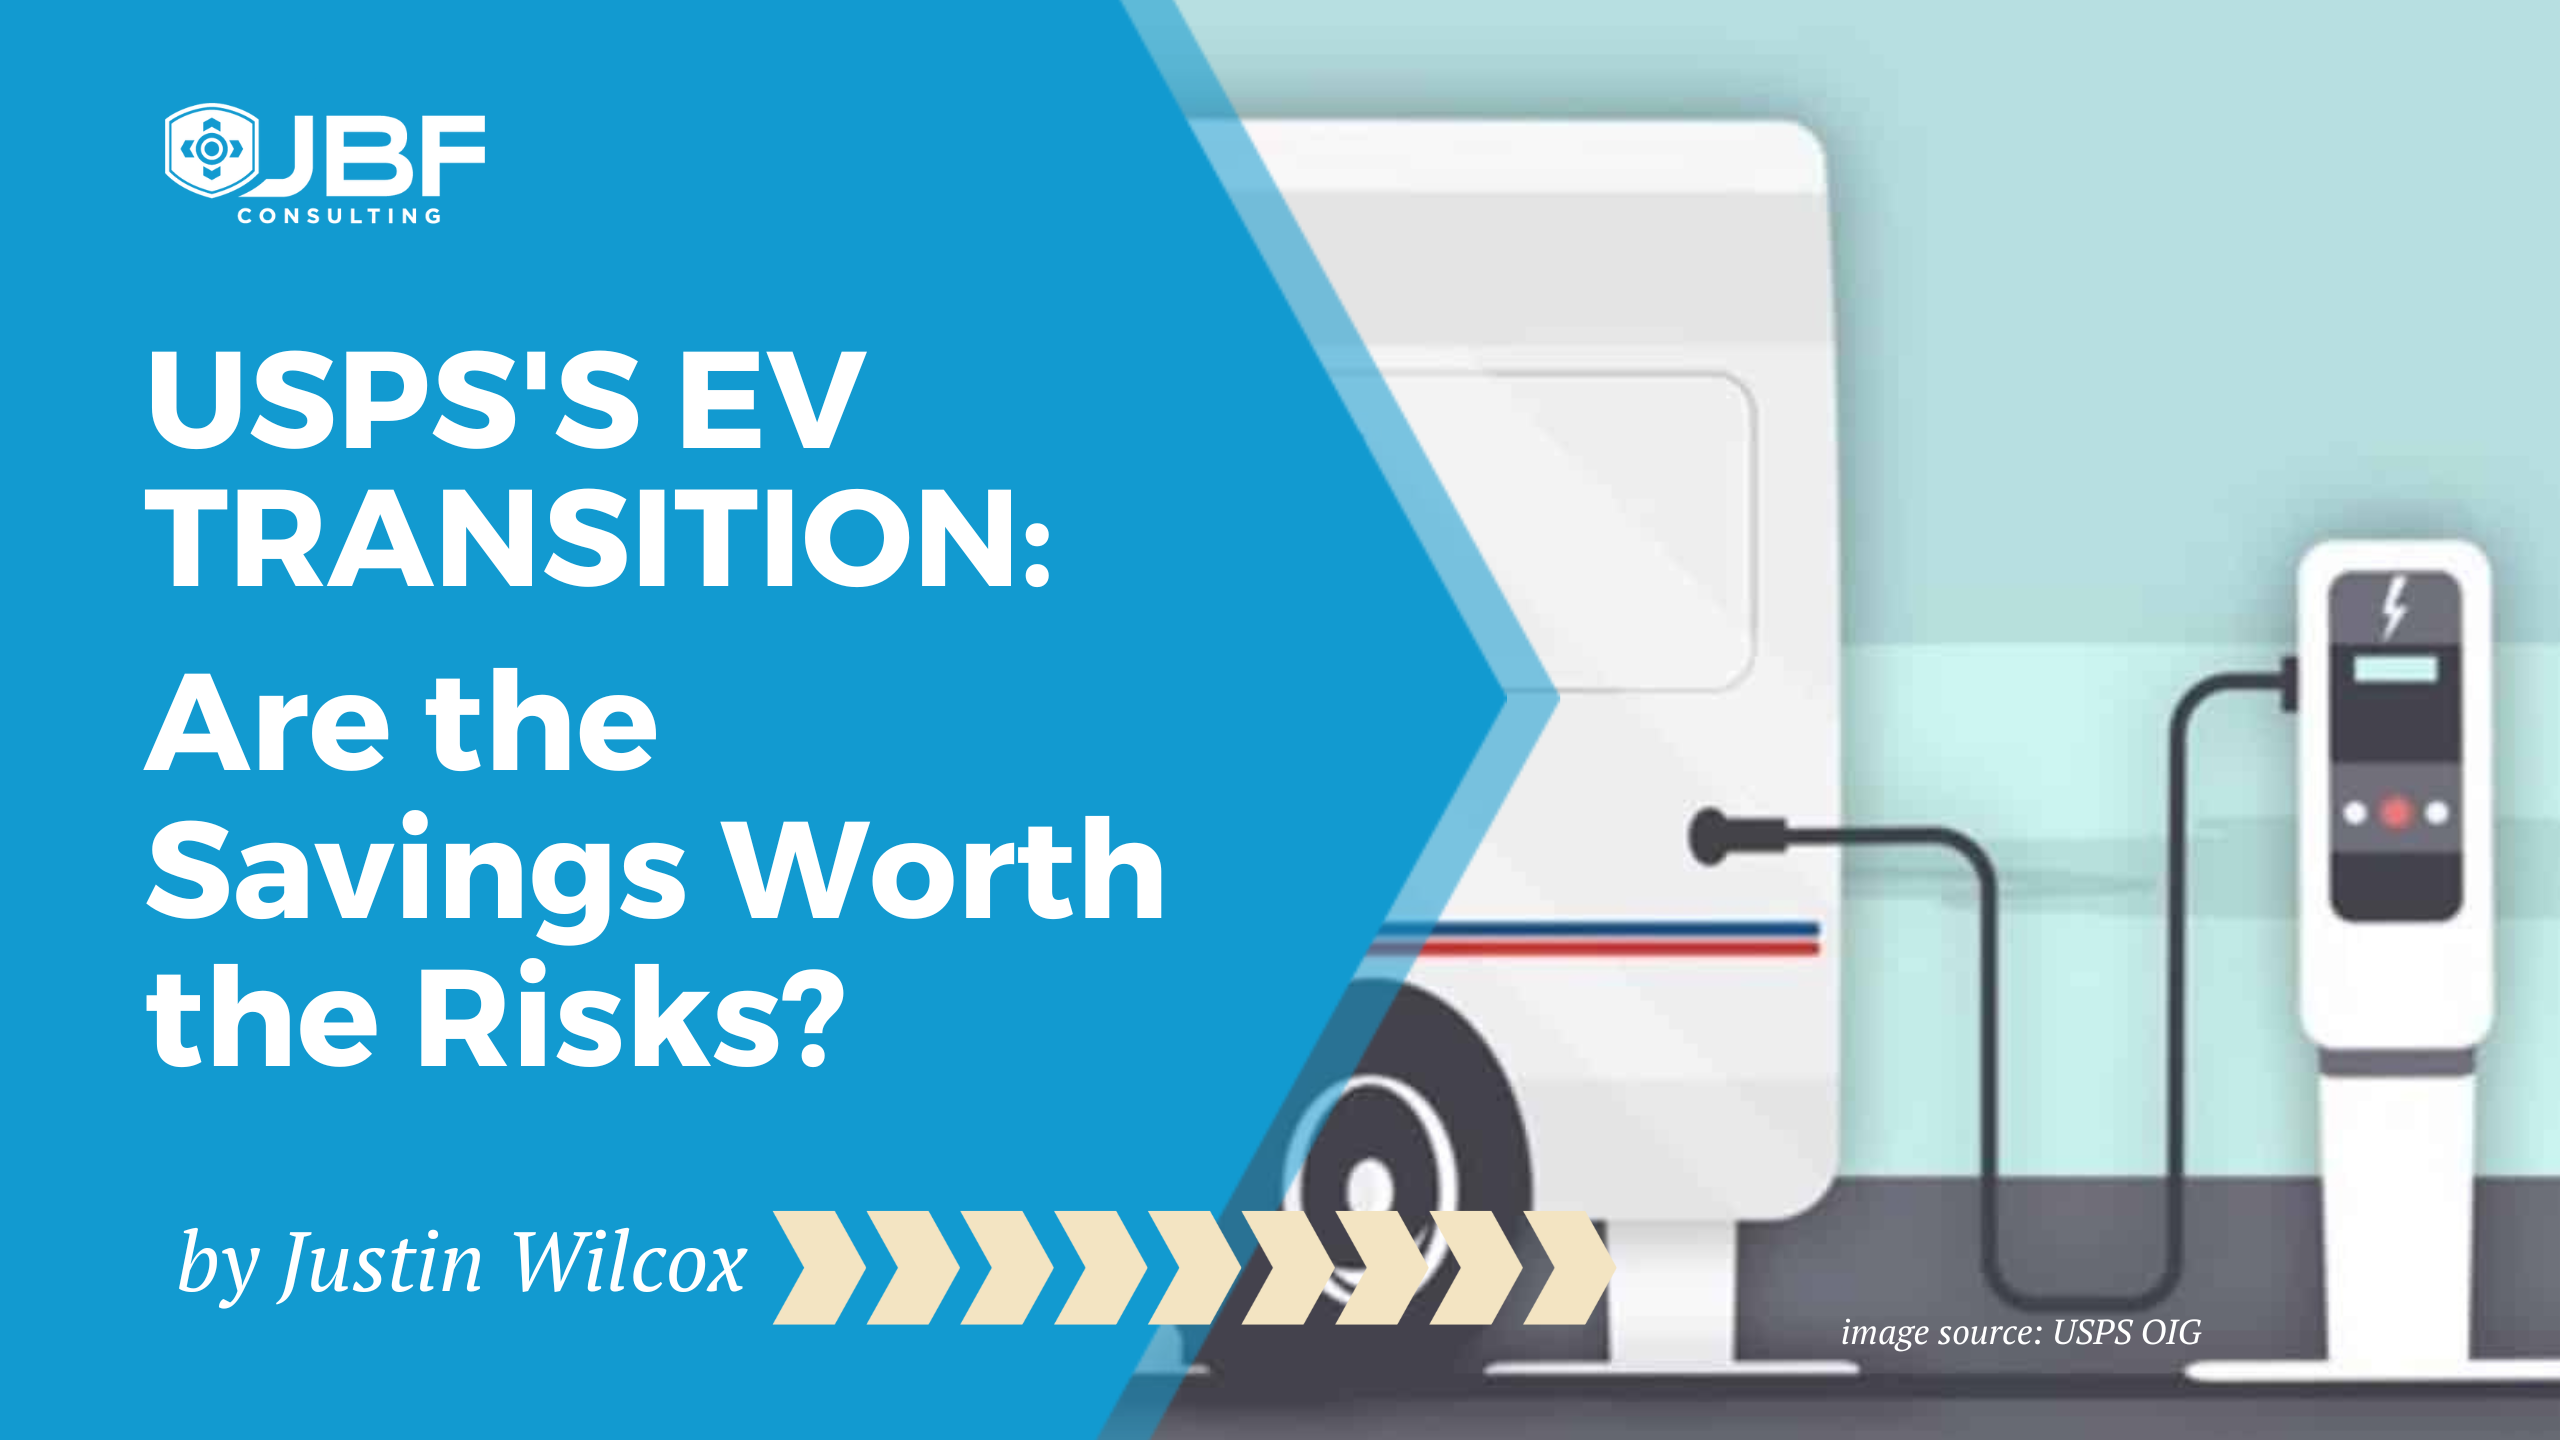 USPS's EV Transition Are the Savings Worth the Risks